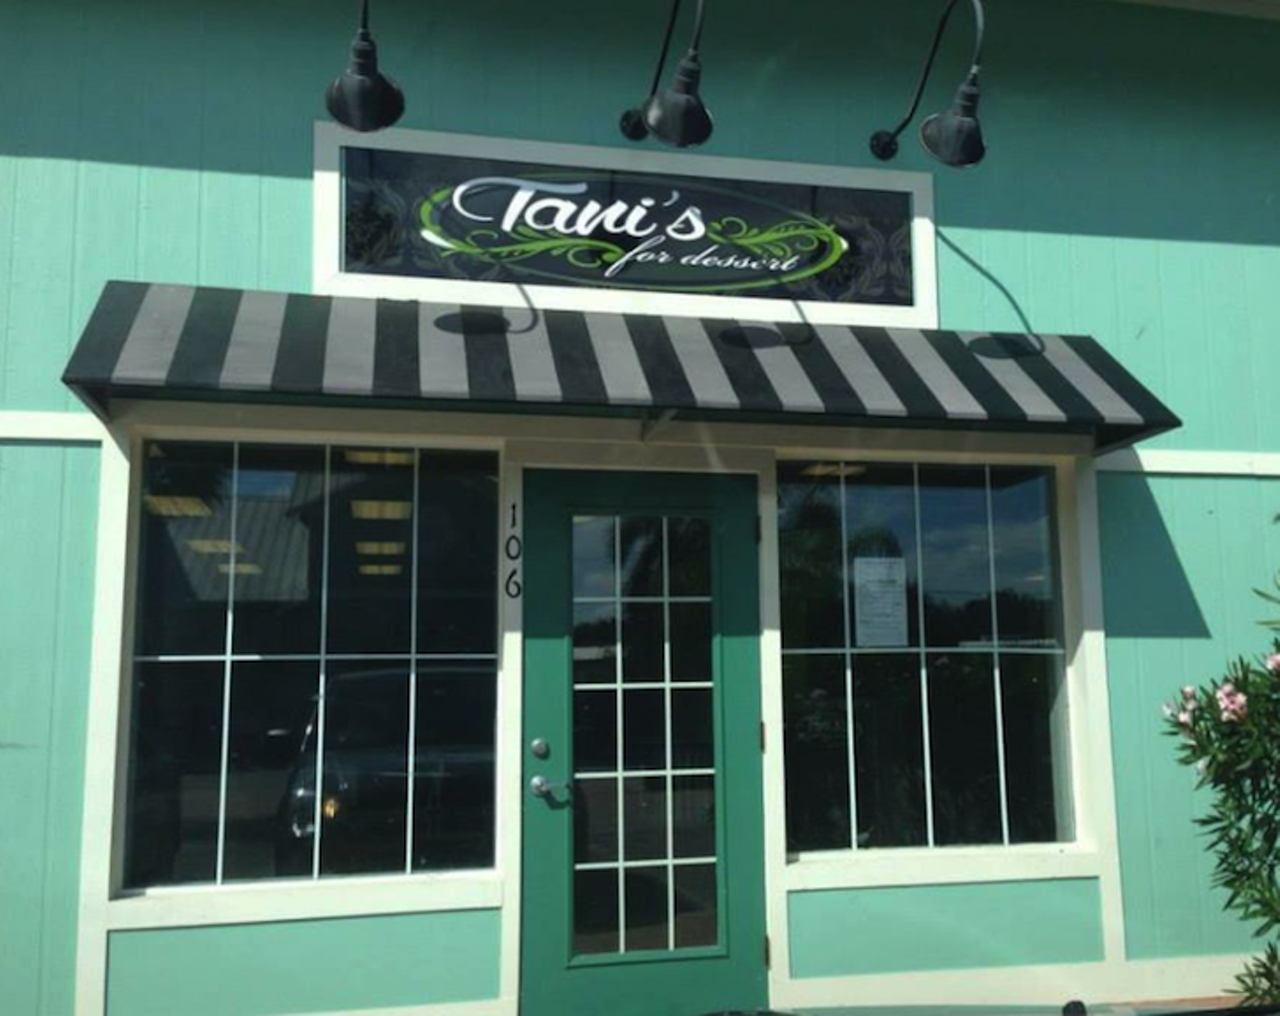 Tani&#146;s for Dessert  
2804 James L. Redman Parkway, Suite 106 Plant City, 813-704-5947
A hidden gem in Plant City serving up desserts, charcuterie and a selection of wines. Bananas foster is a must.
Photo via Tani&#146;s/Facebook